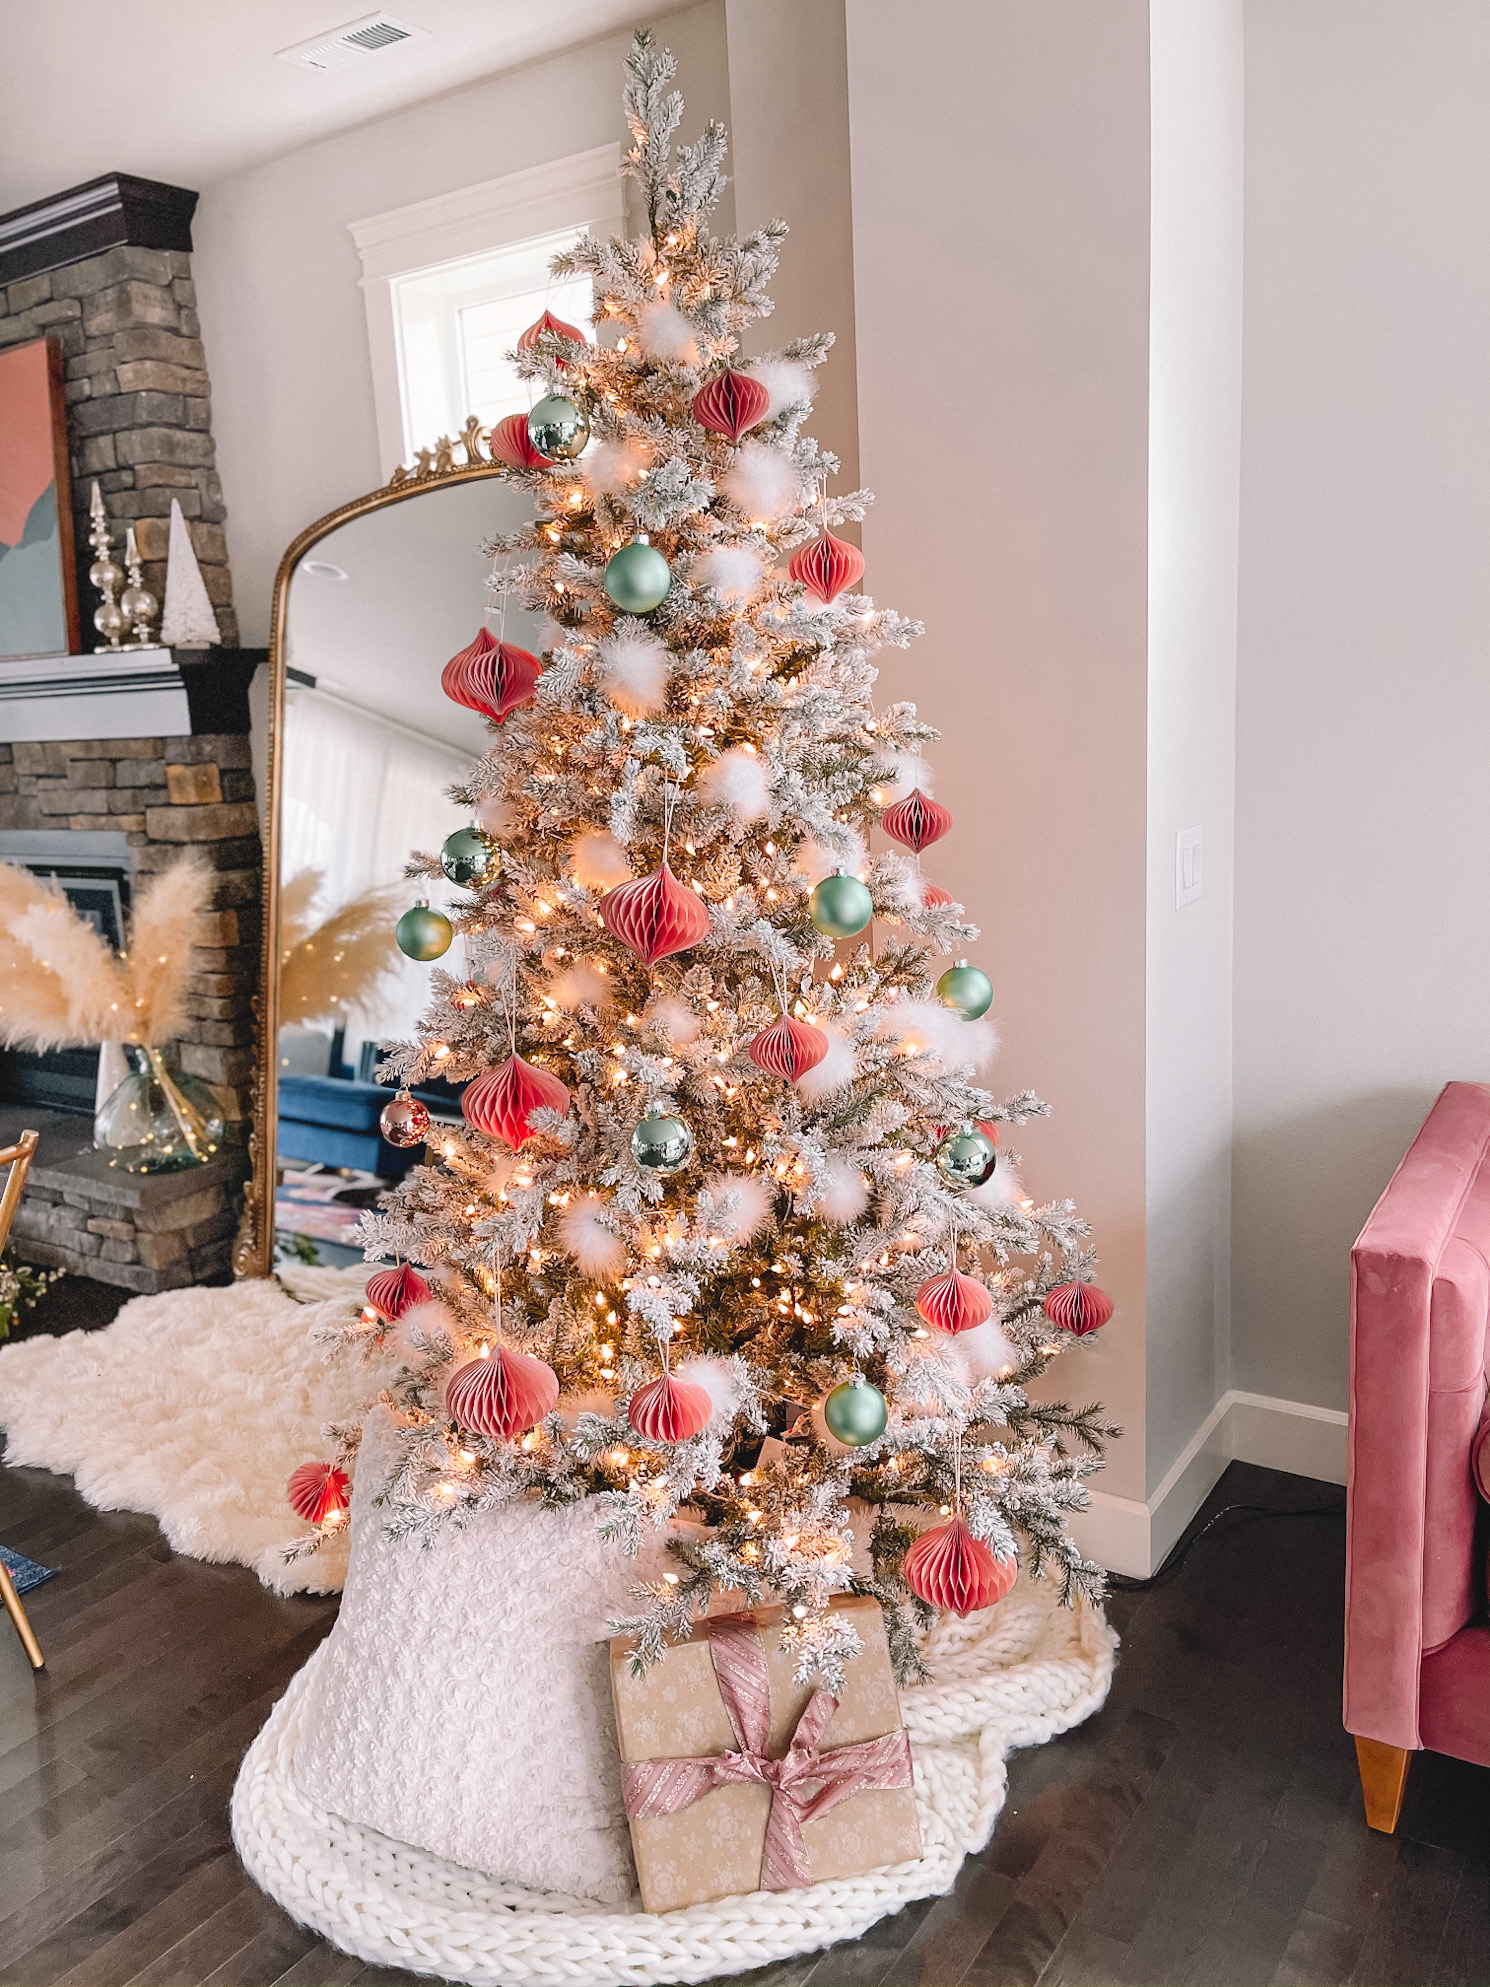 Better Homes And Gardens Christmas Decorating Ideas / 12 Holiday Decoration Themes For Your Home Better Homes And Gardens Real Estate Life - From elegant christmas trees, to tables & wreaths for door decoration.